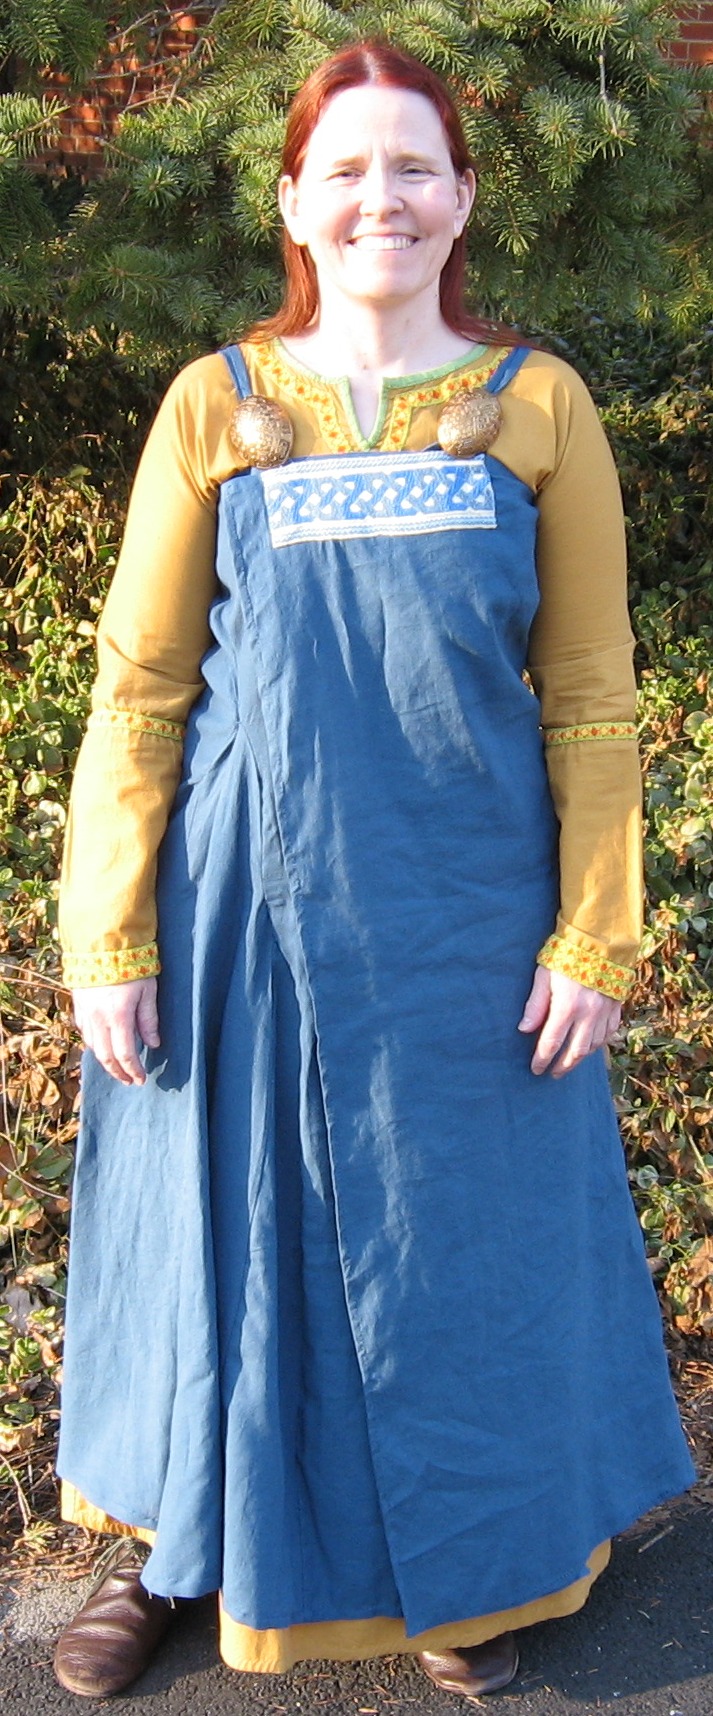 Catherine, Wraparound Viking apron dress design (experimental only!  Not really a recreation) in IL019 linen.